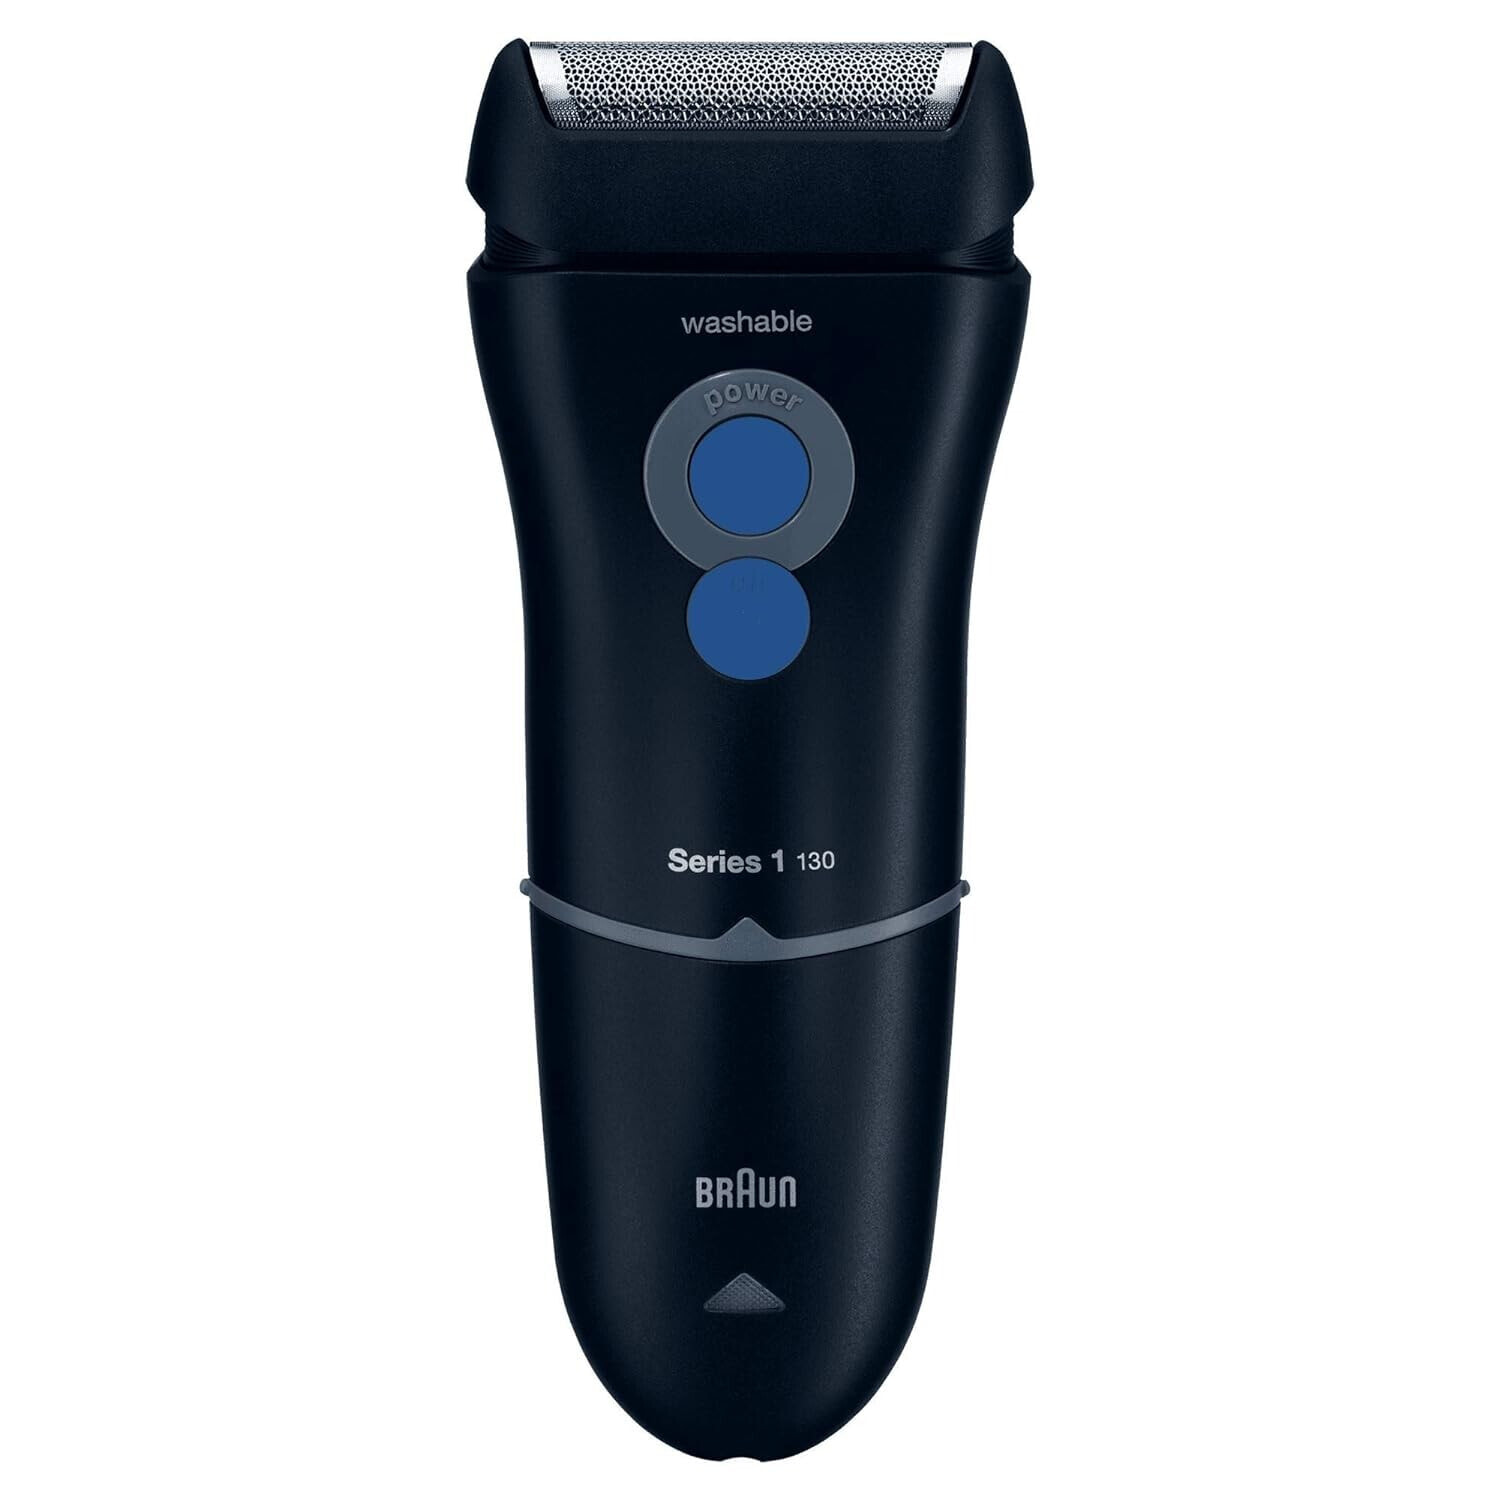 Braun 130s-1 Blue Night Series 1 Electric Shaver - Ideal for First Shave, Effective and Comfortable Gift Idea